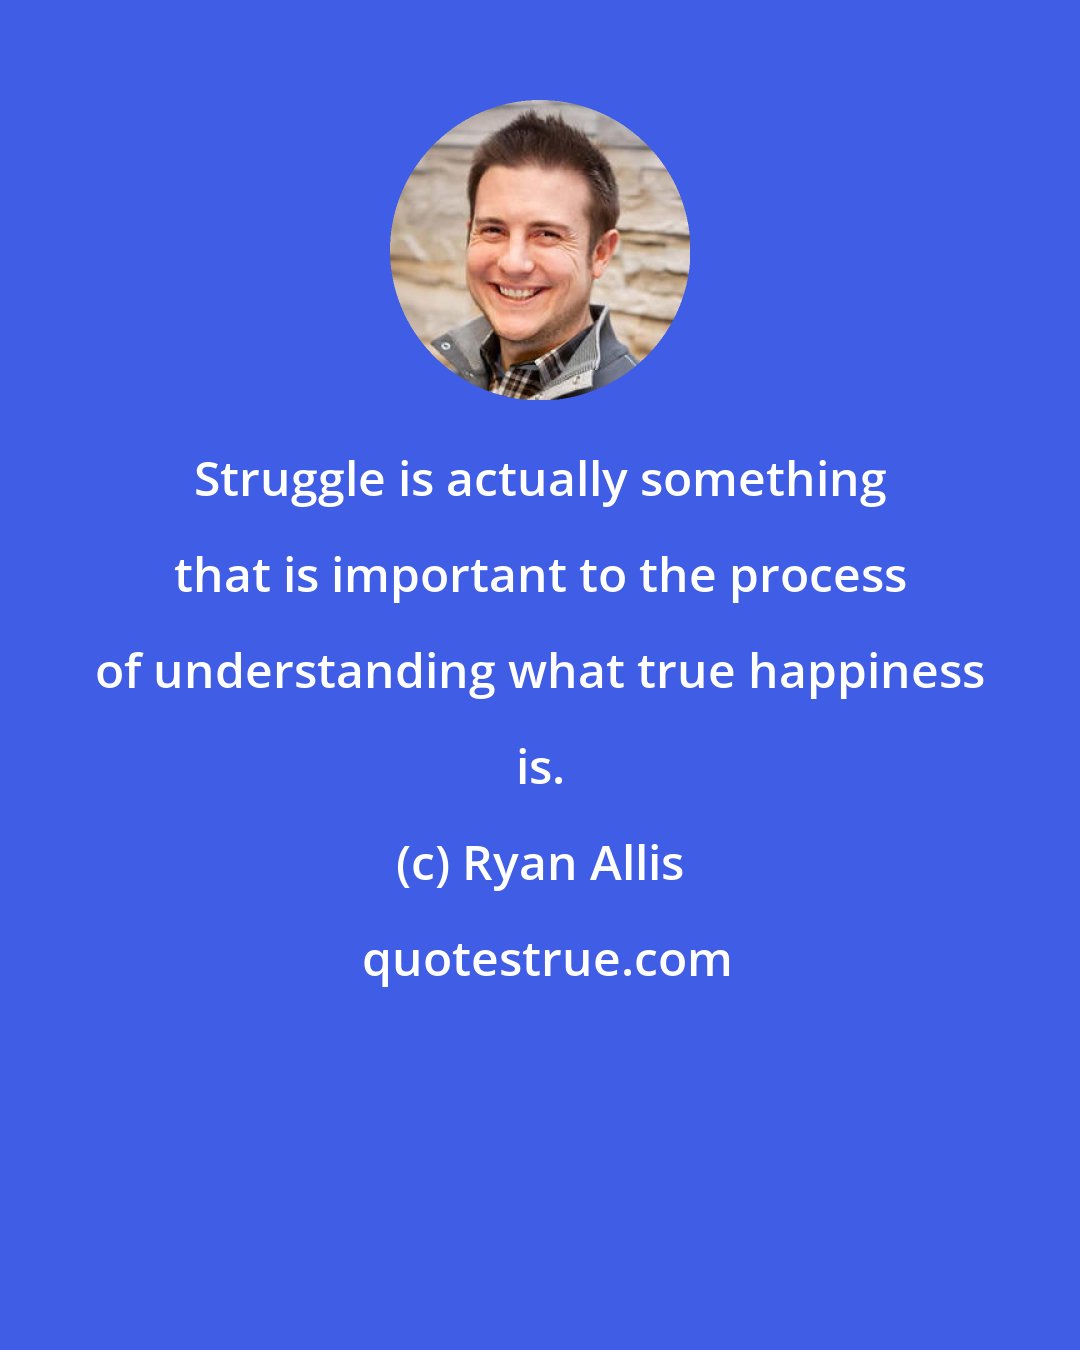 Ryan Allis: Struggle is actually something that is important to the process of understanding what true happiness is.